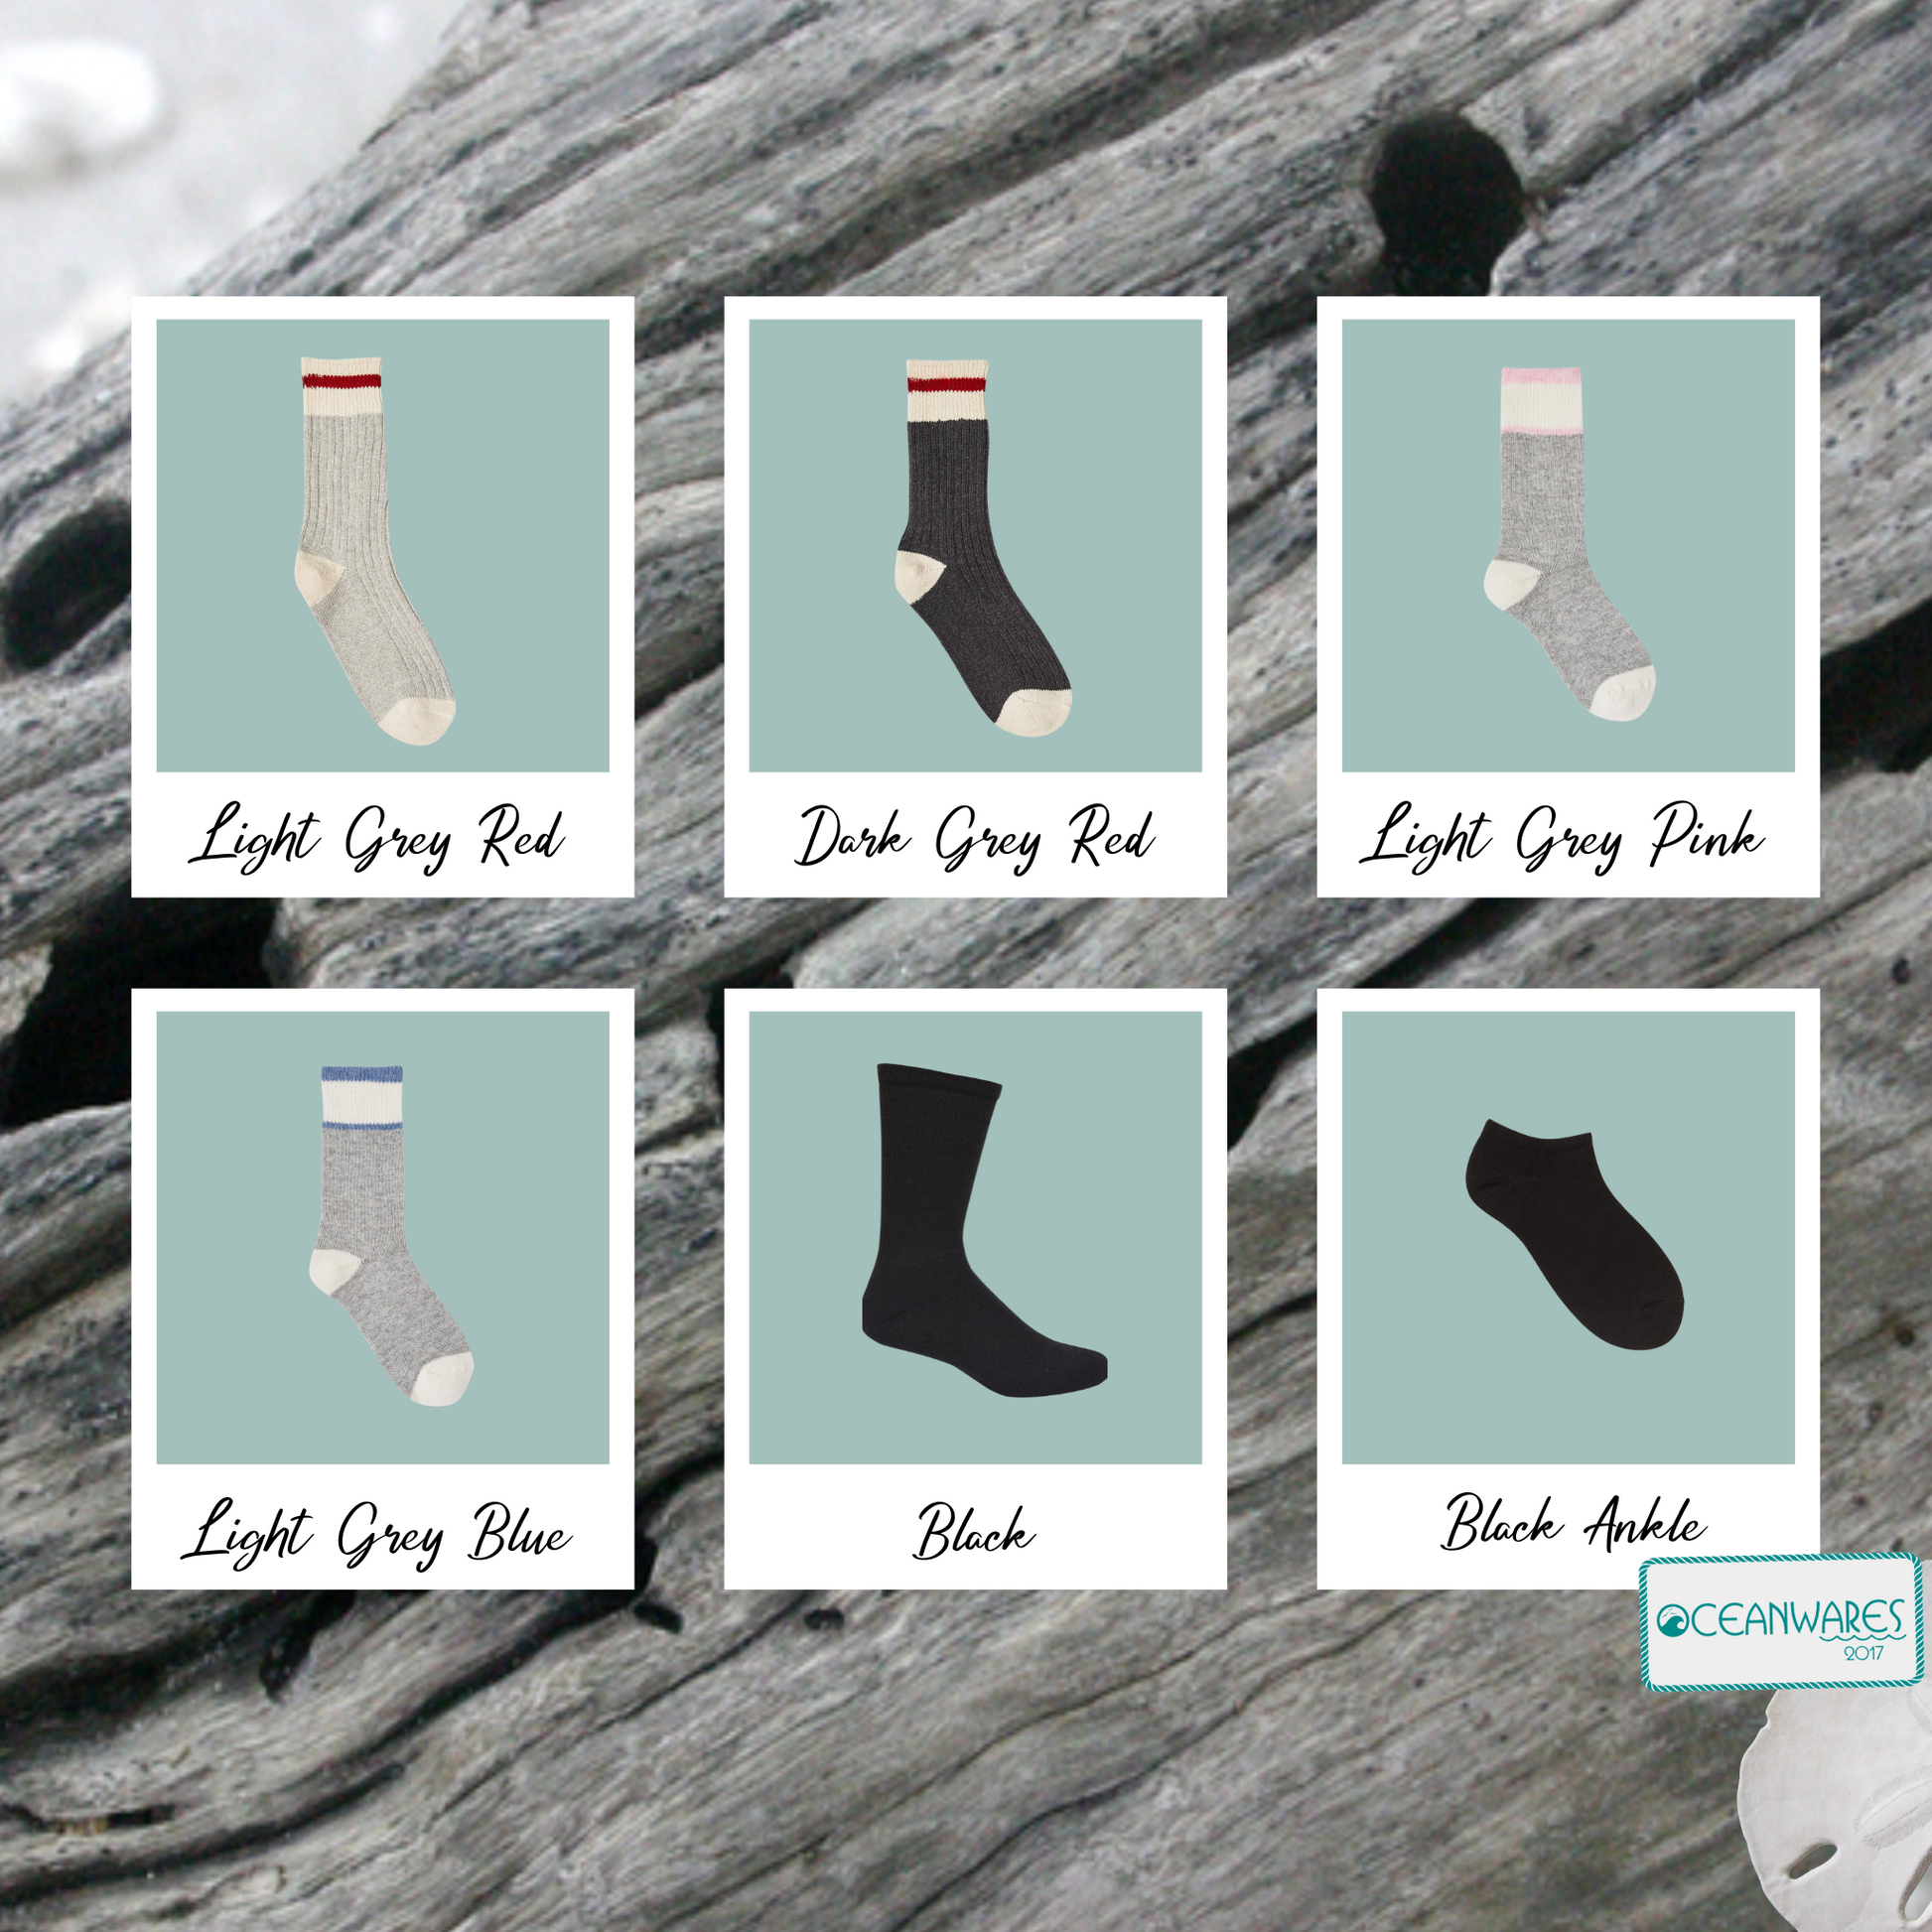 It's the end of the world, have a drink with us, SUPER SOFT NOVELTY WORD SOCKS.